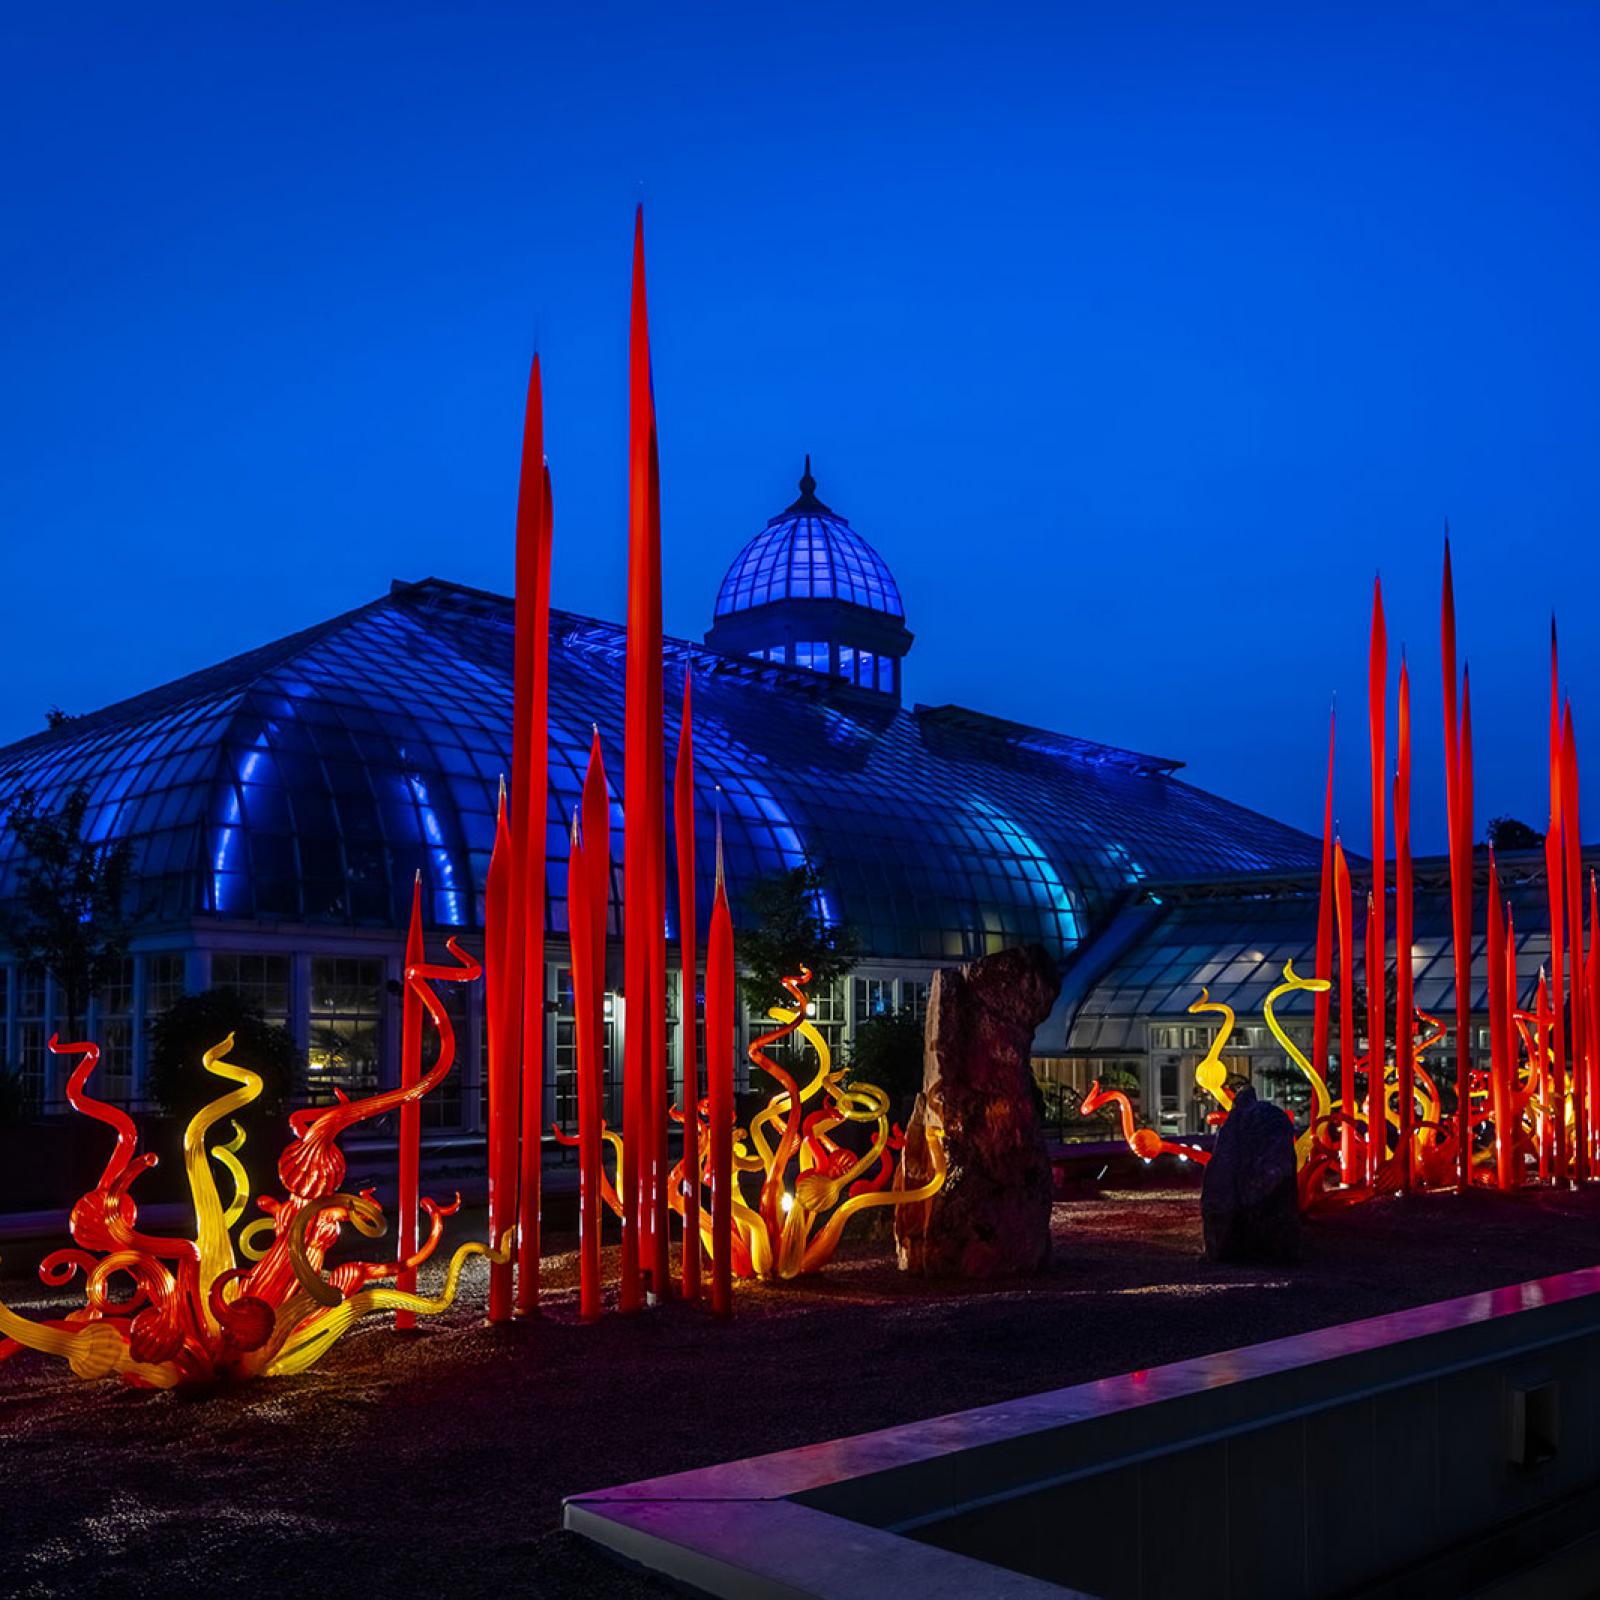 Red Reeds, 2003, and Sunset Sprays, 2019 by Dale Chihuly